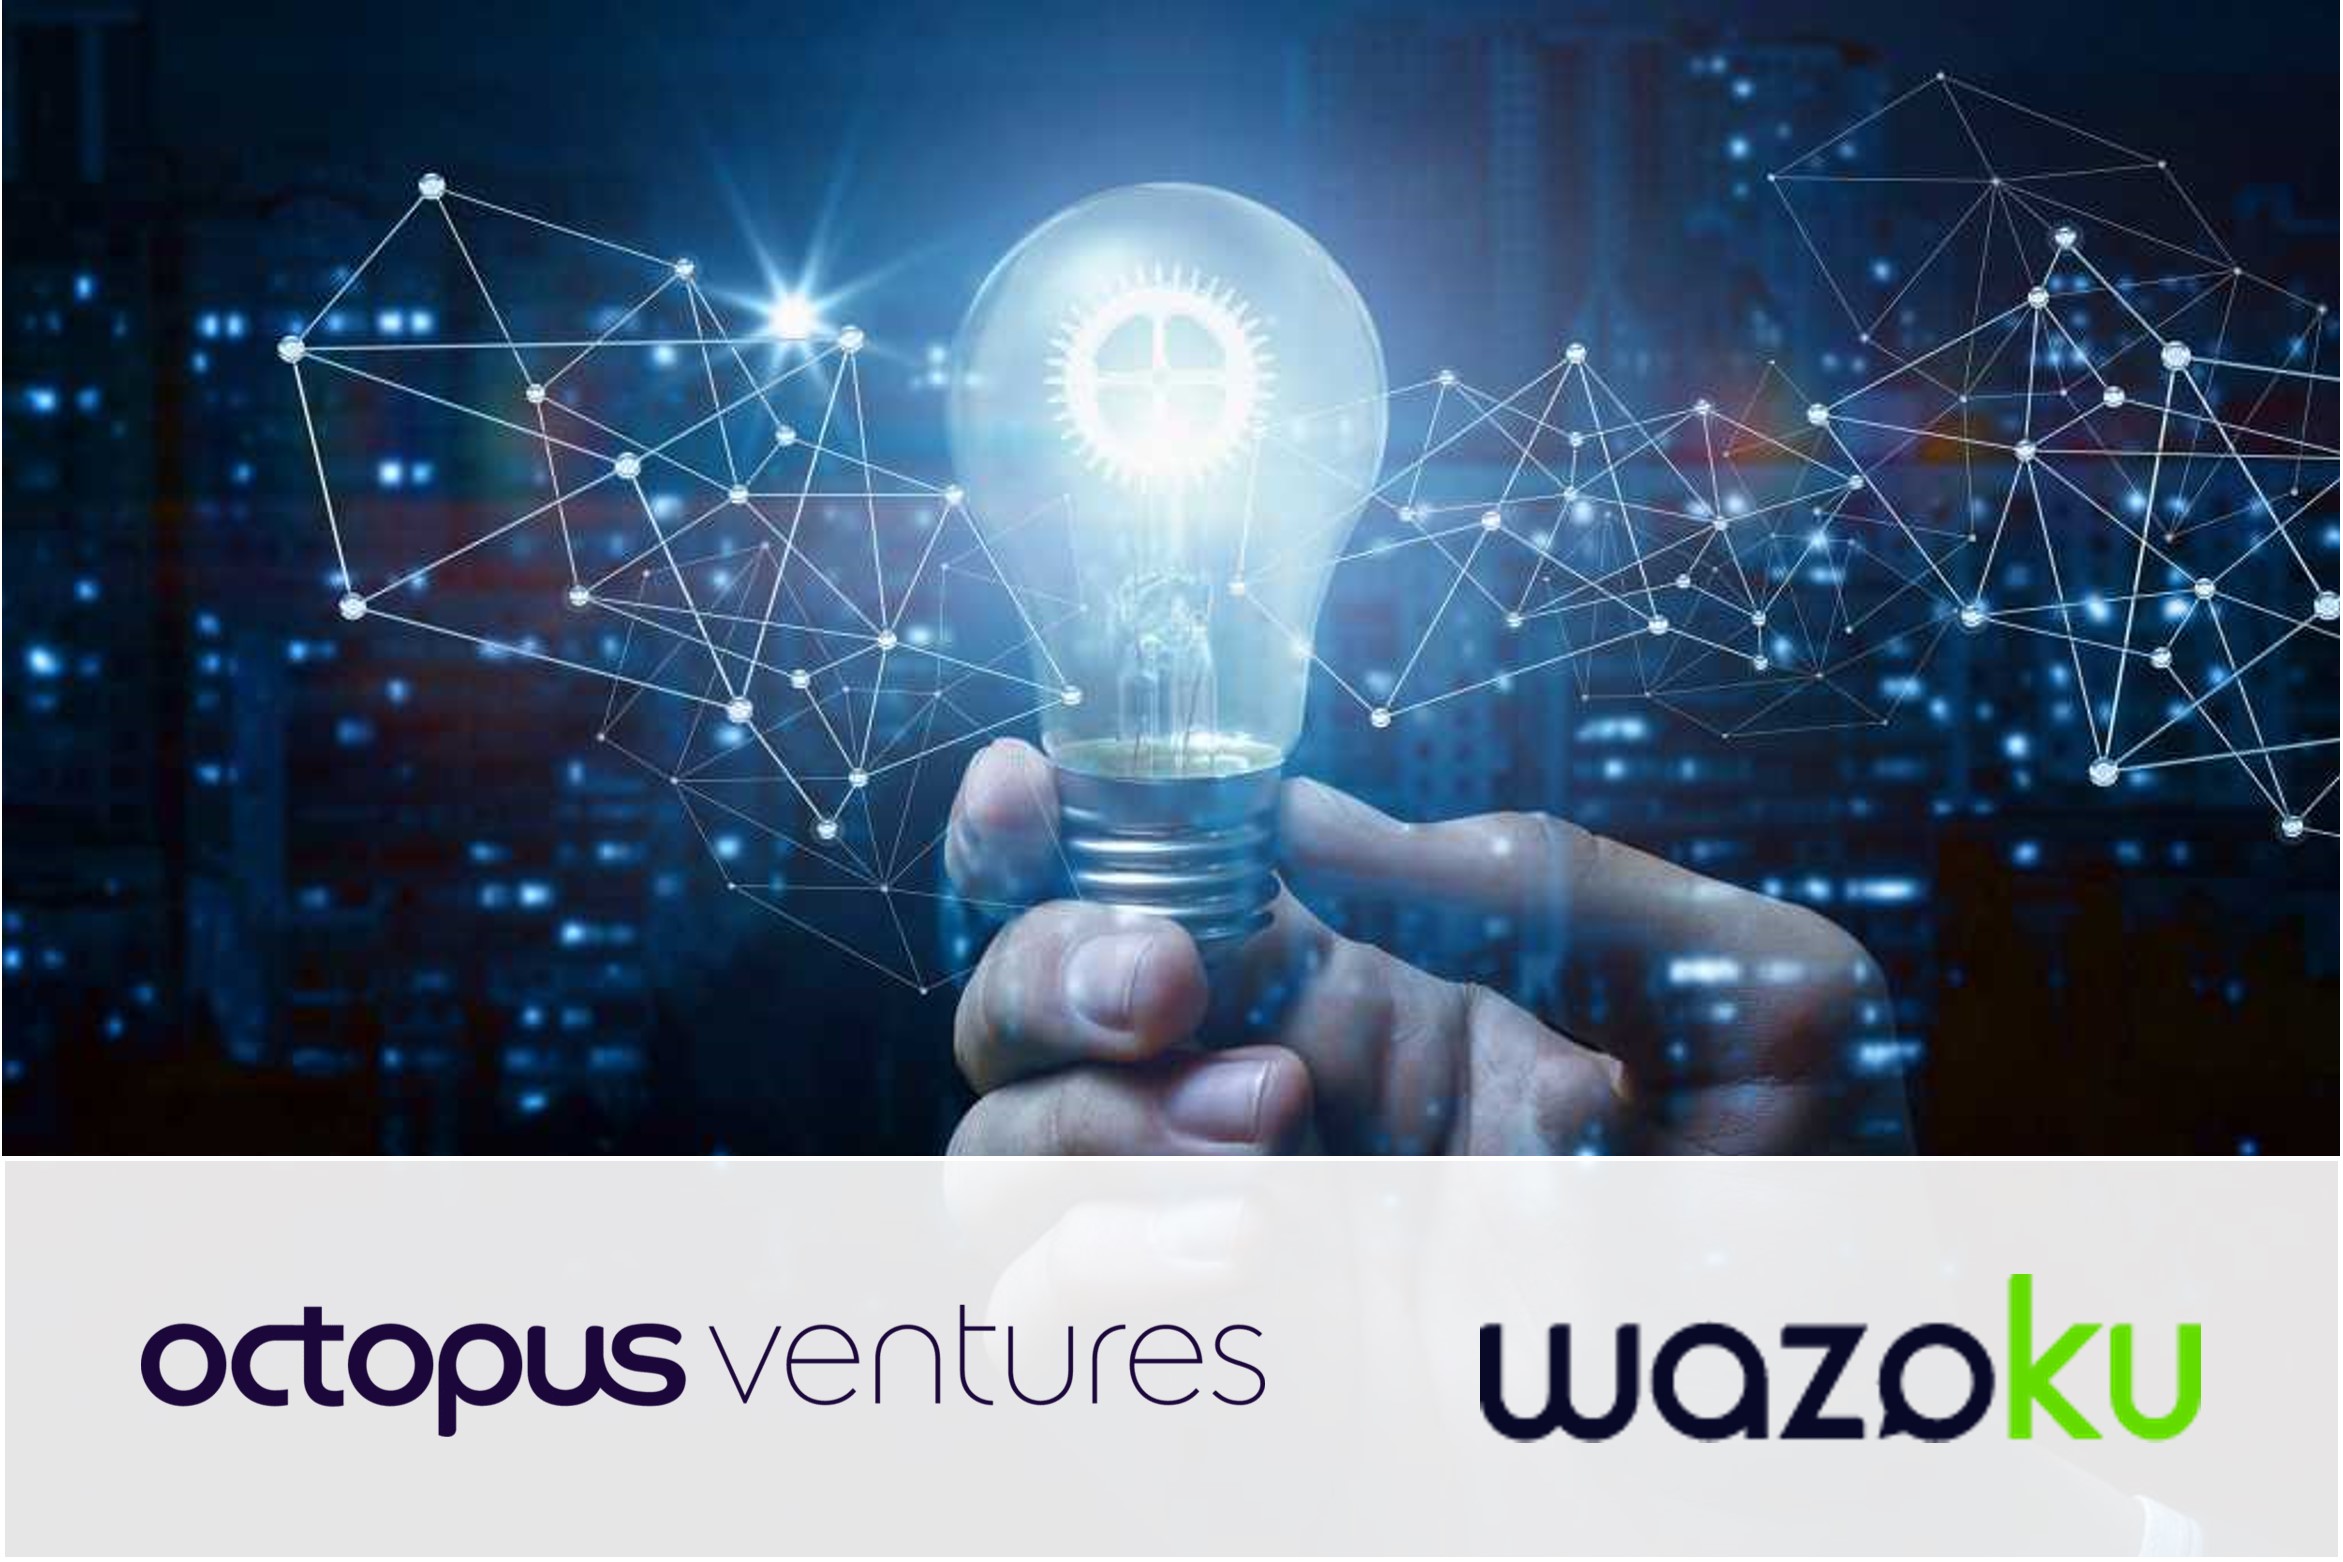 Luminii provides CDD support to Octopus Ventures on their investment in Wazoku